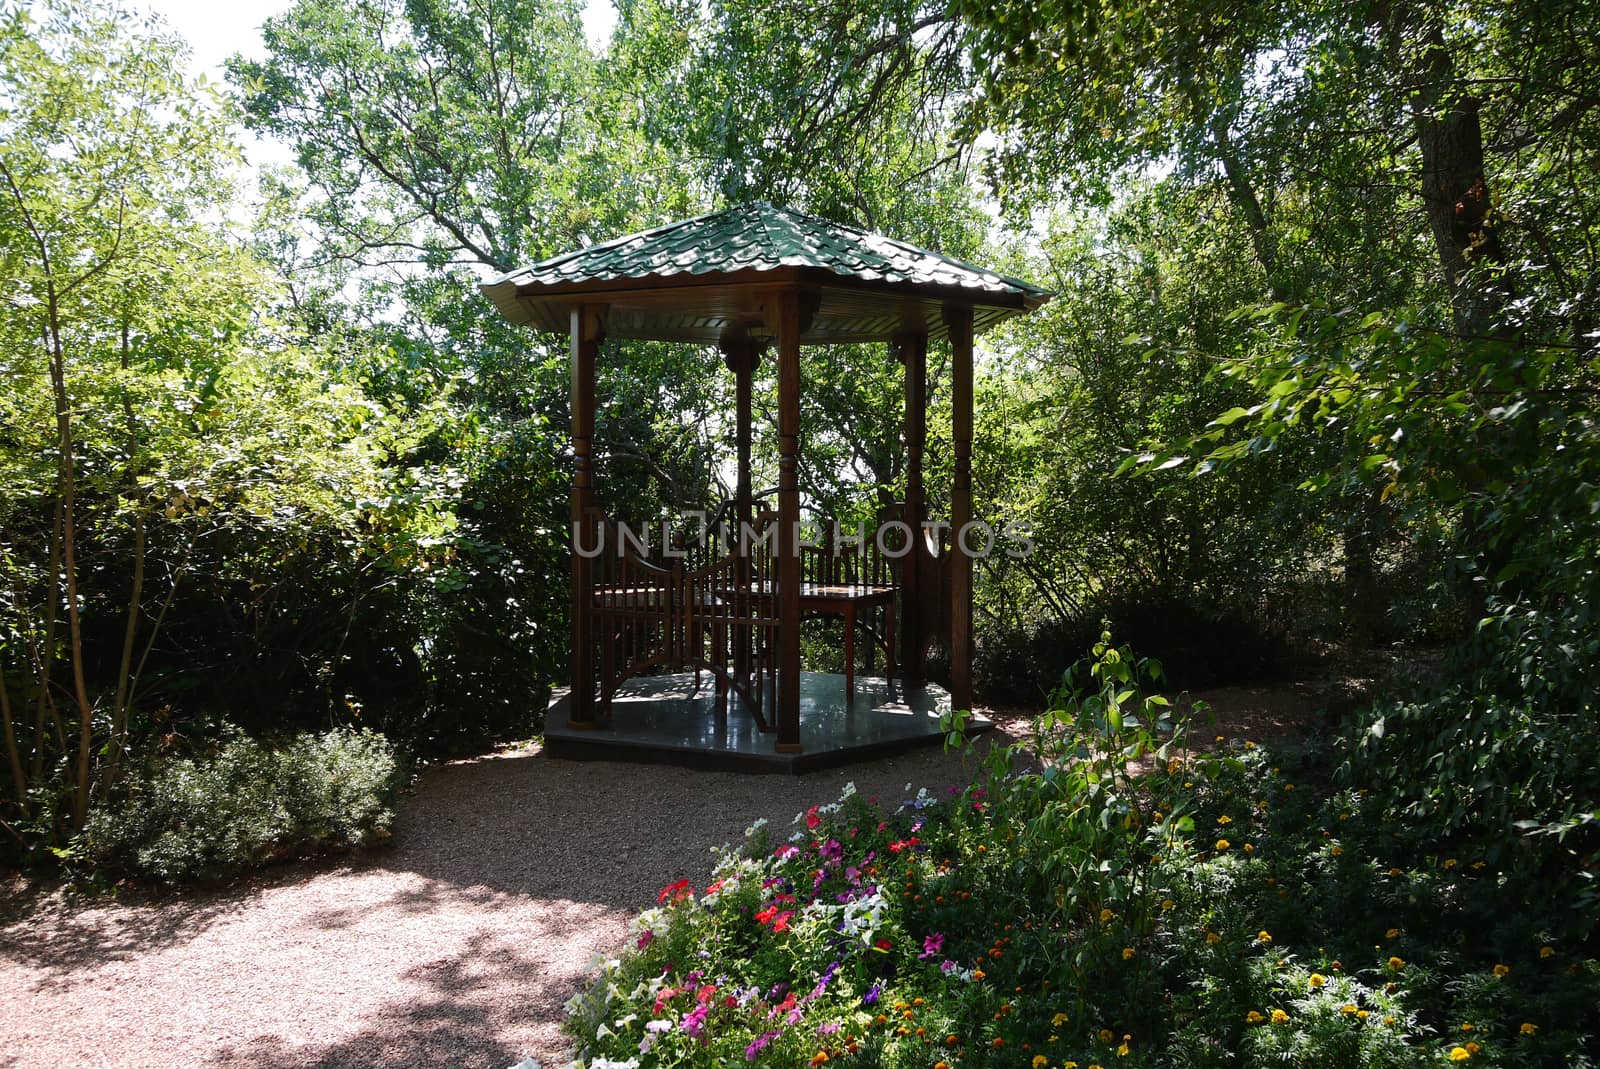 A tiny gazebo in the garden. You can sit and enjoy the scents in the air